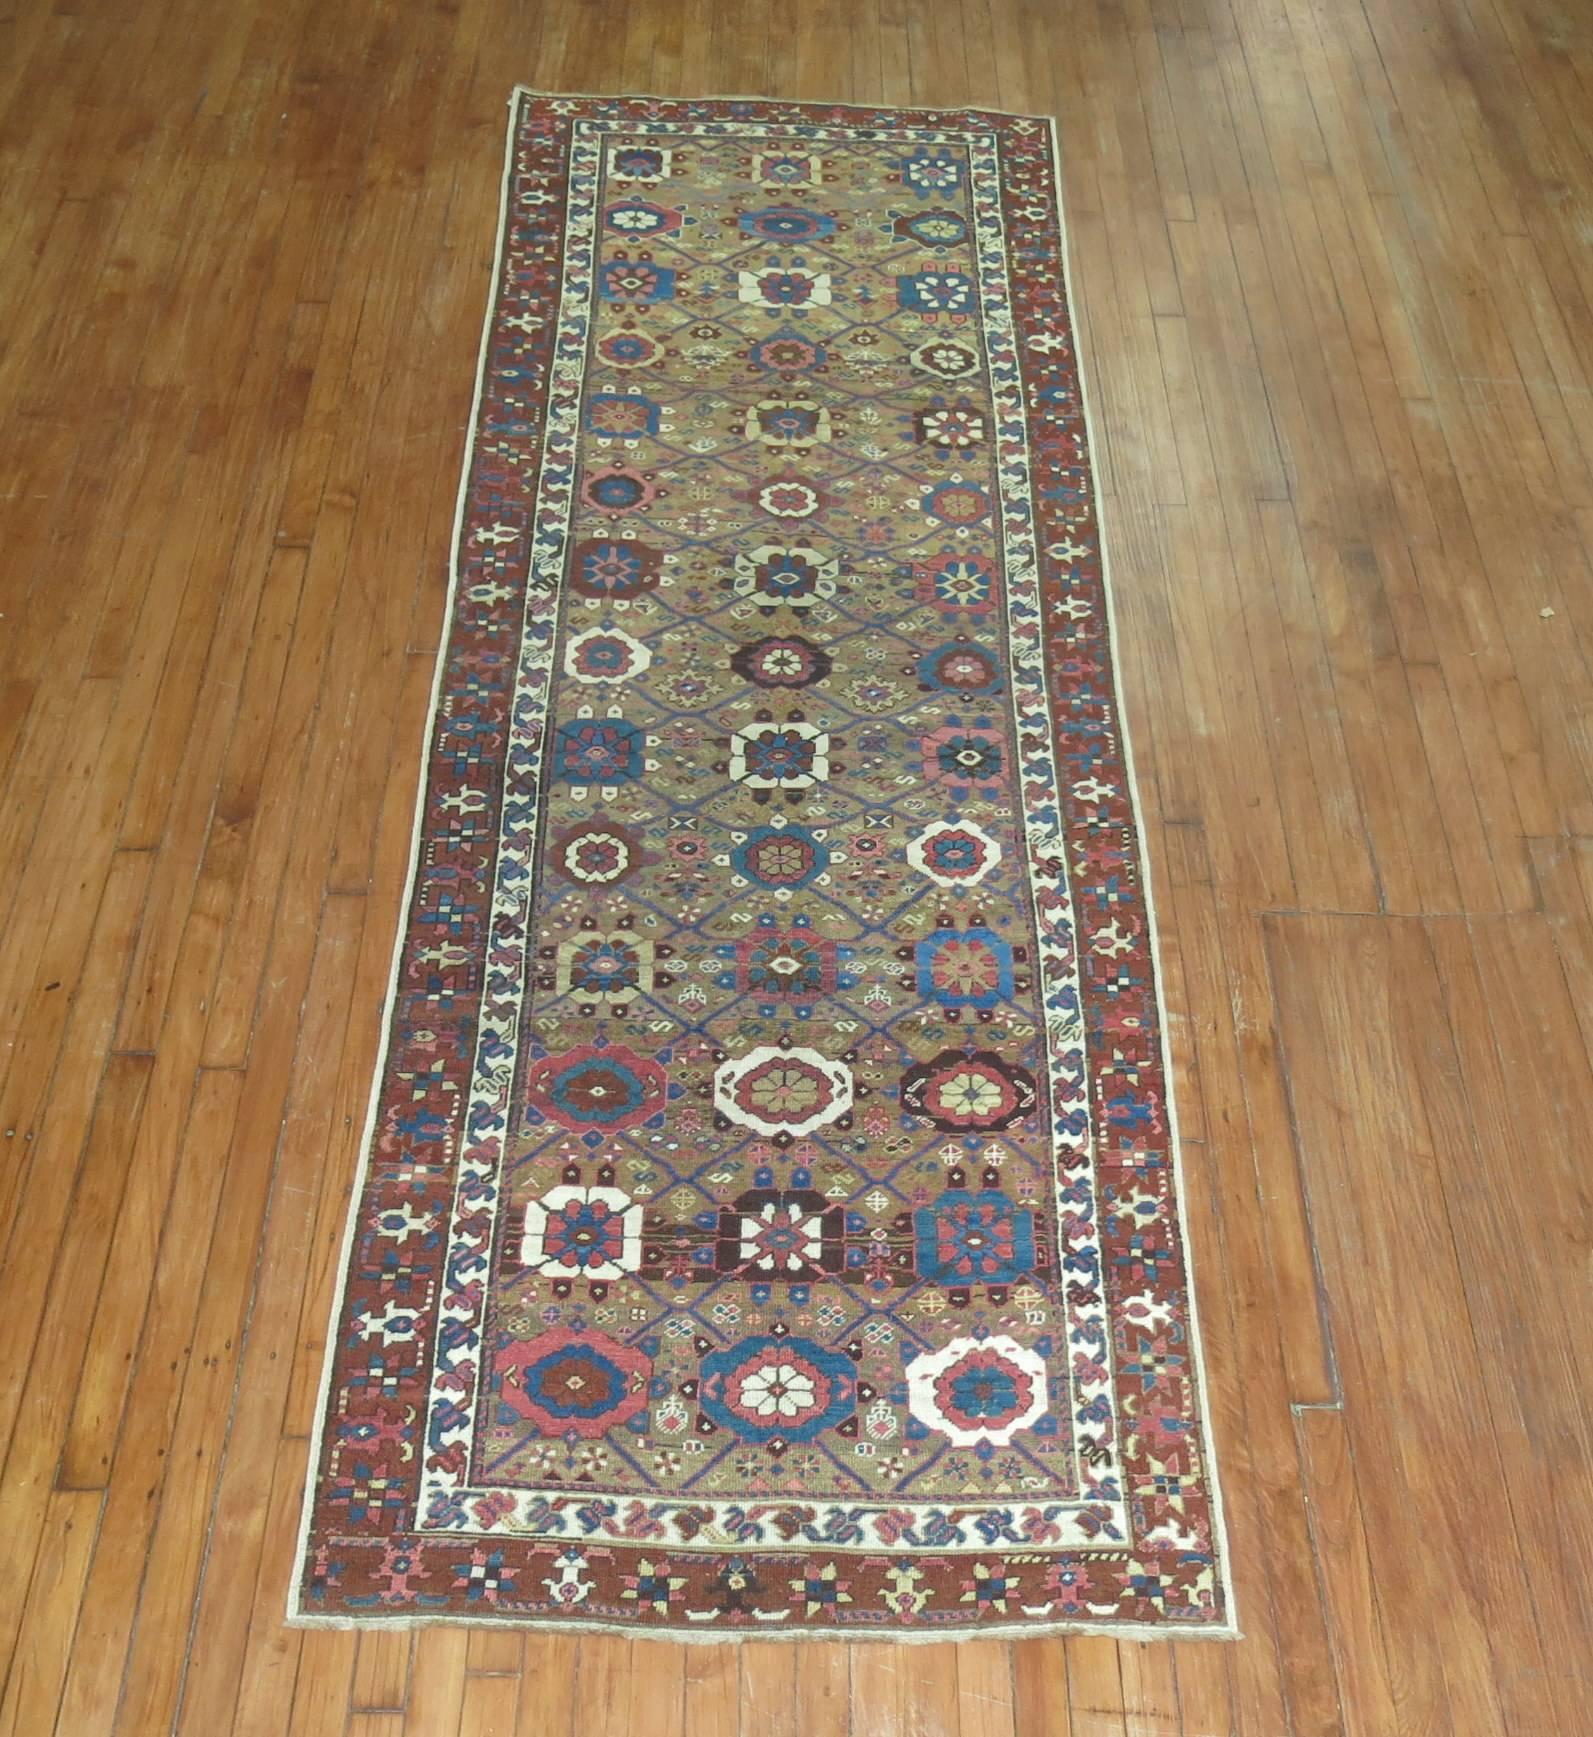 Northwest Persian runner, possibly from Bakshsaish Region with an all-over mini-khani motif set on a camel brown ground.

Measures: 3'5'' x 10'4''.